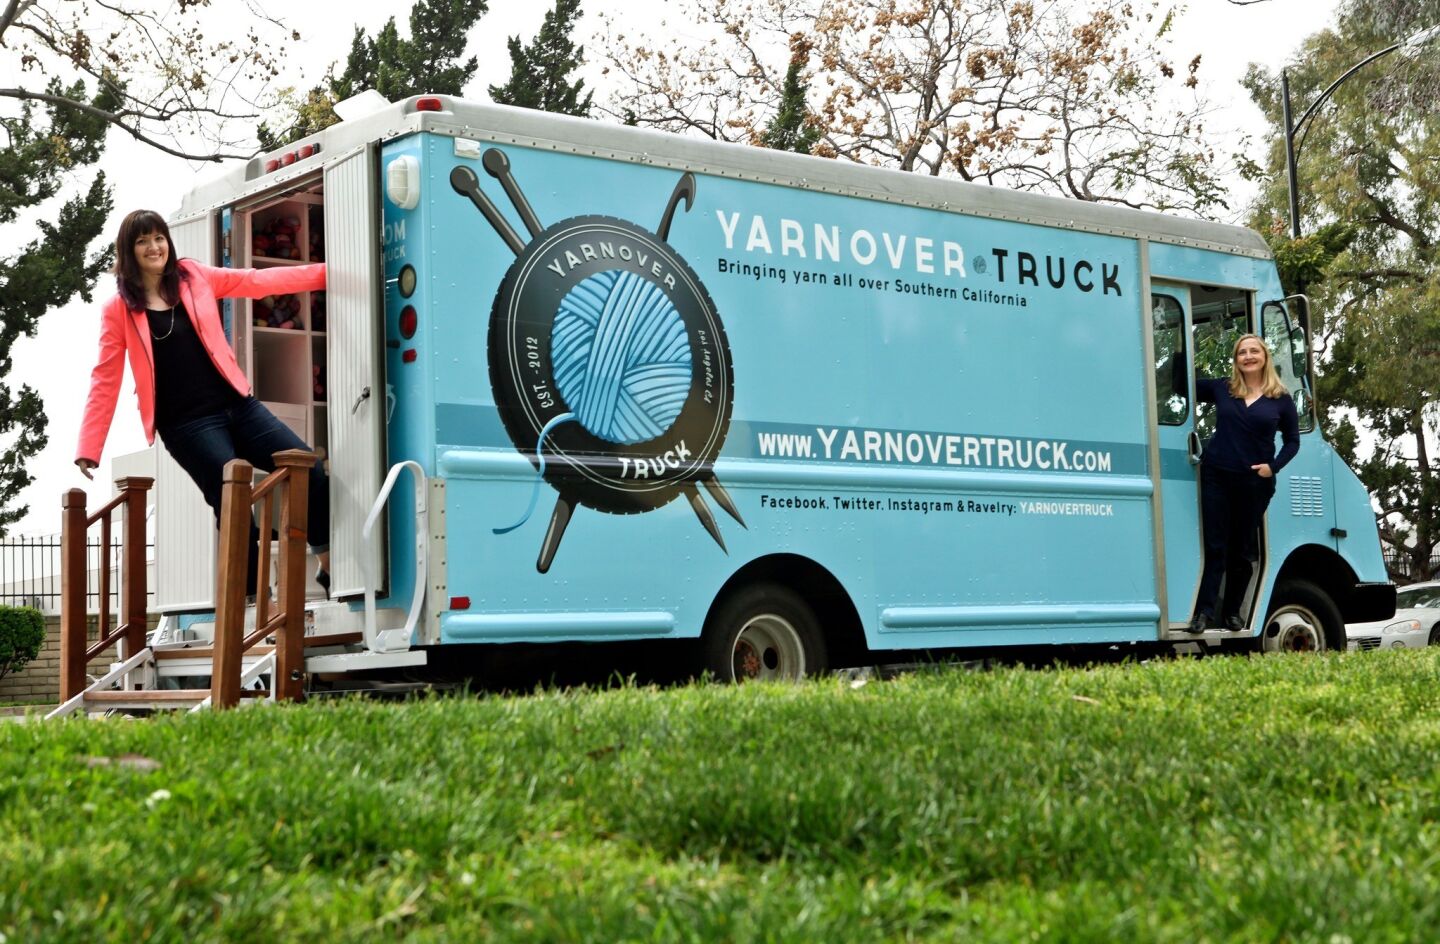 Barbra Pushies, left, and Maridee Nelson are launching the Yarnover Truck, a Little Debbie snack truck converted into a mobile yarn store.